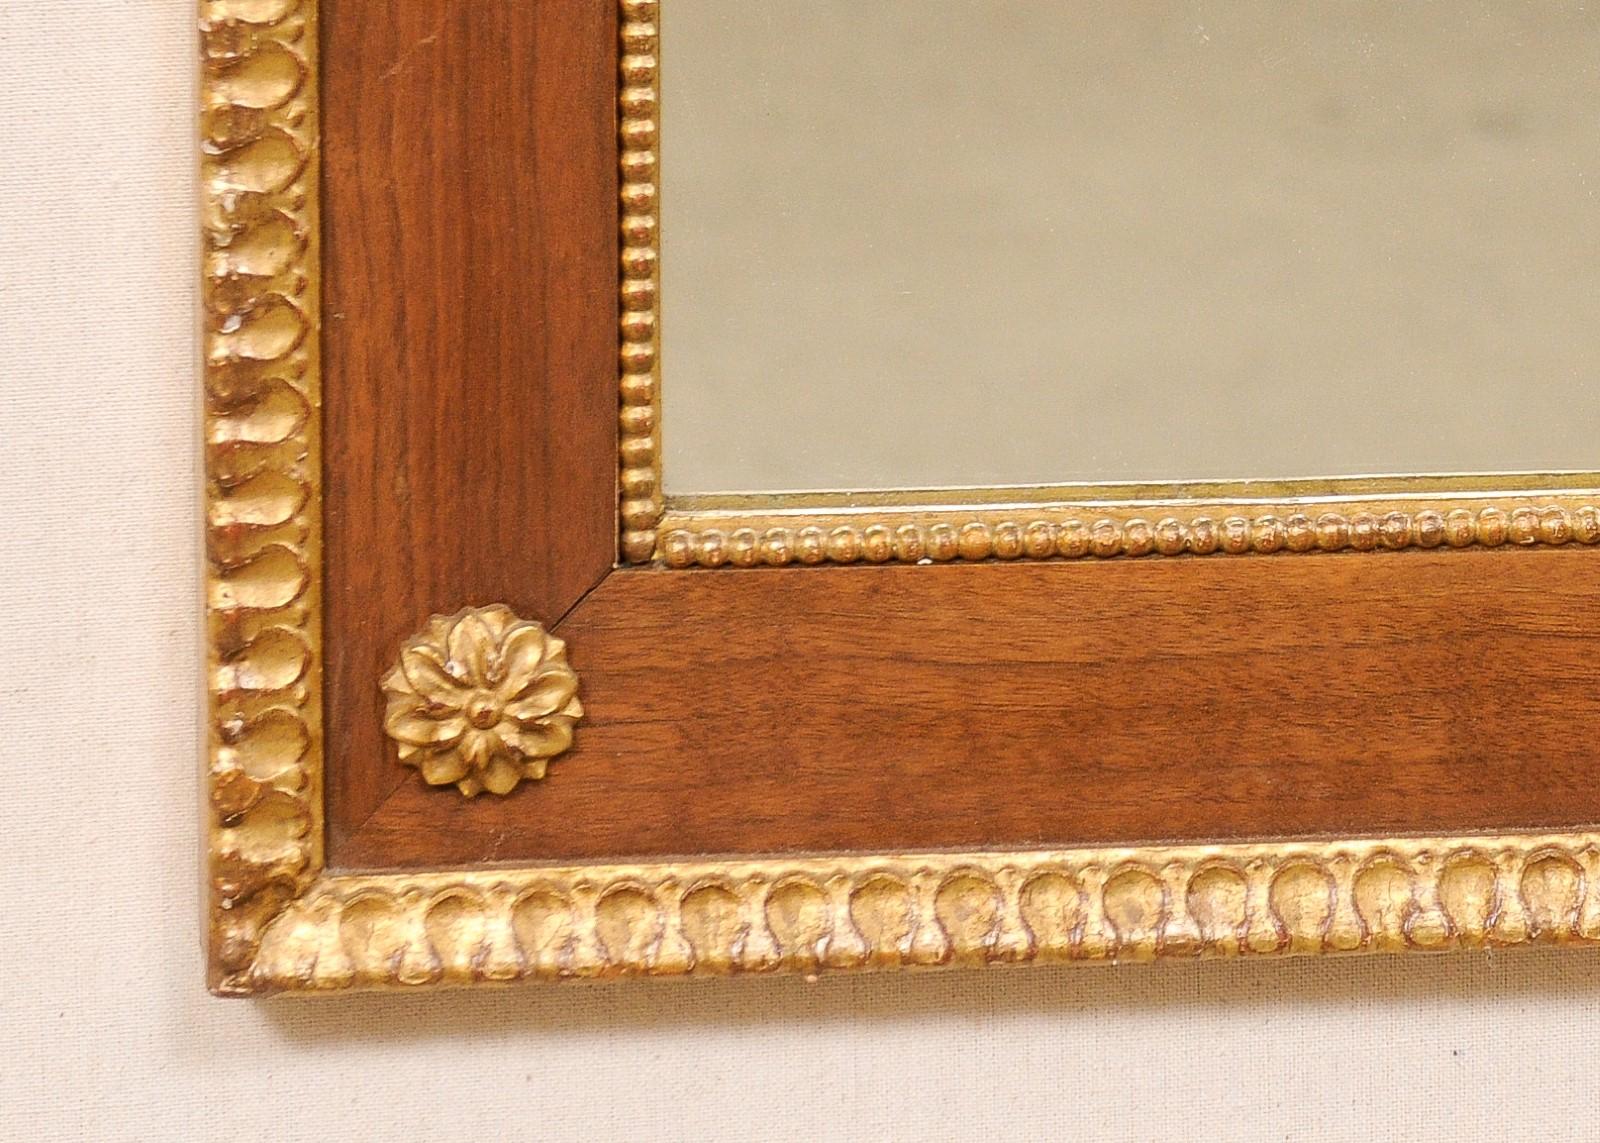 20th Century Italian Antique Trumeau Mirror w/Original Gilt Finish & Musical Themed Accents For Sale